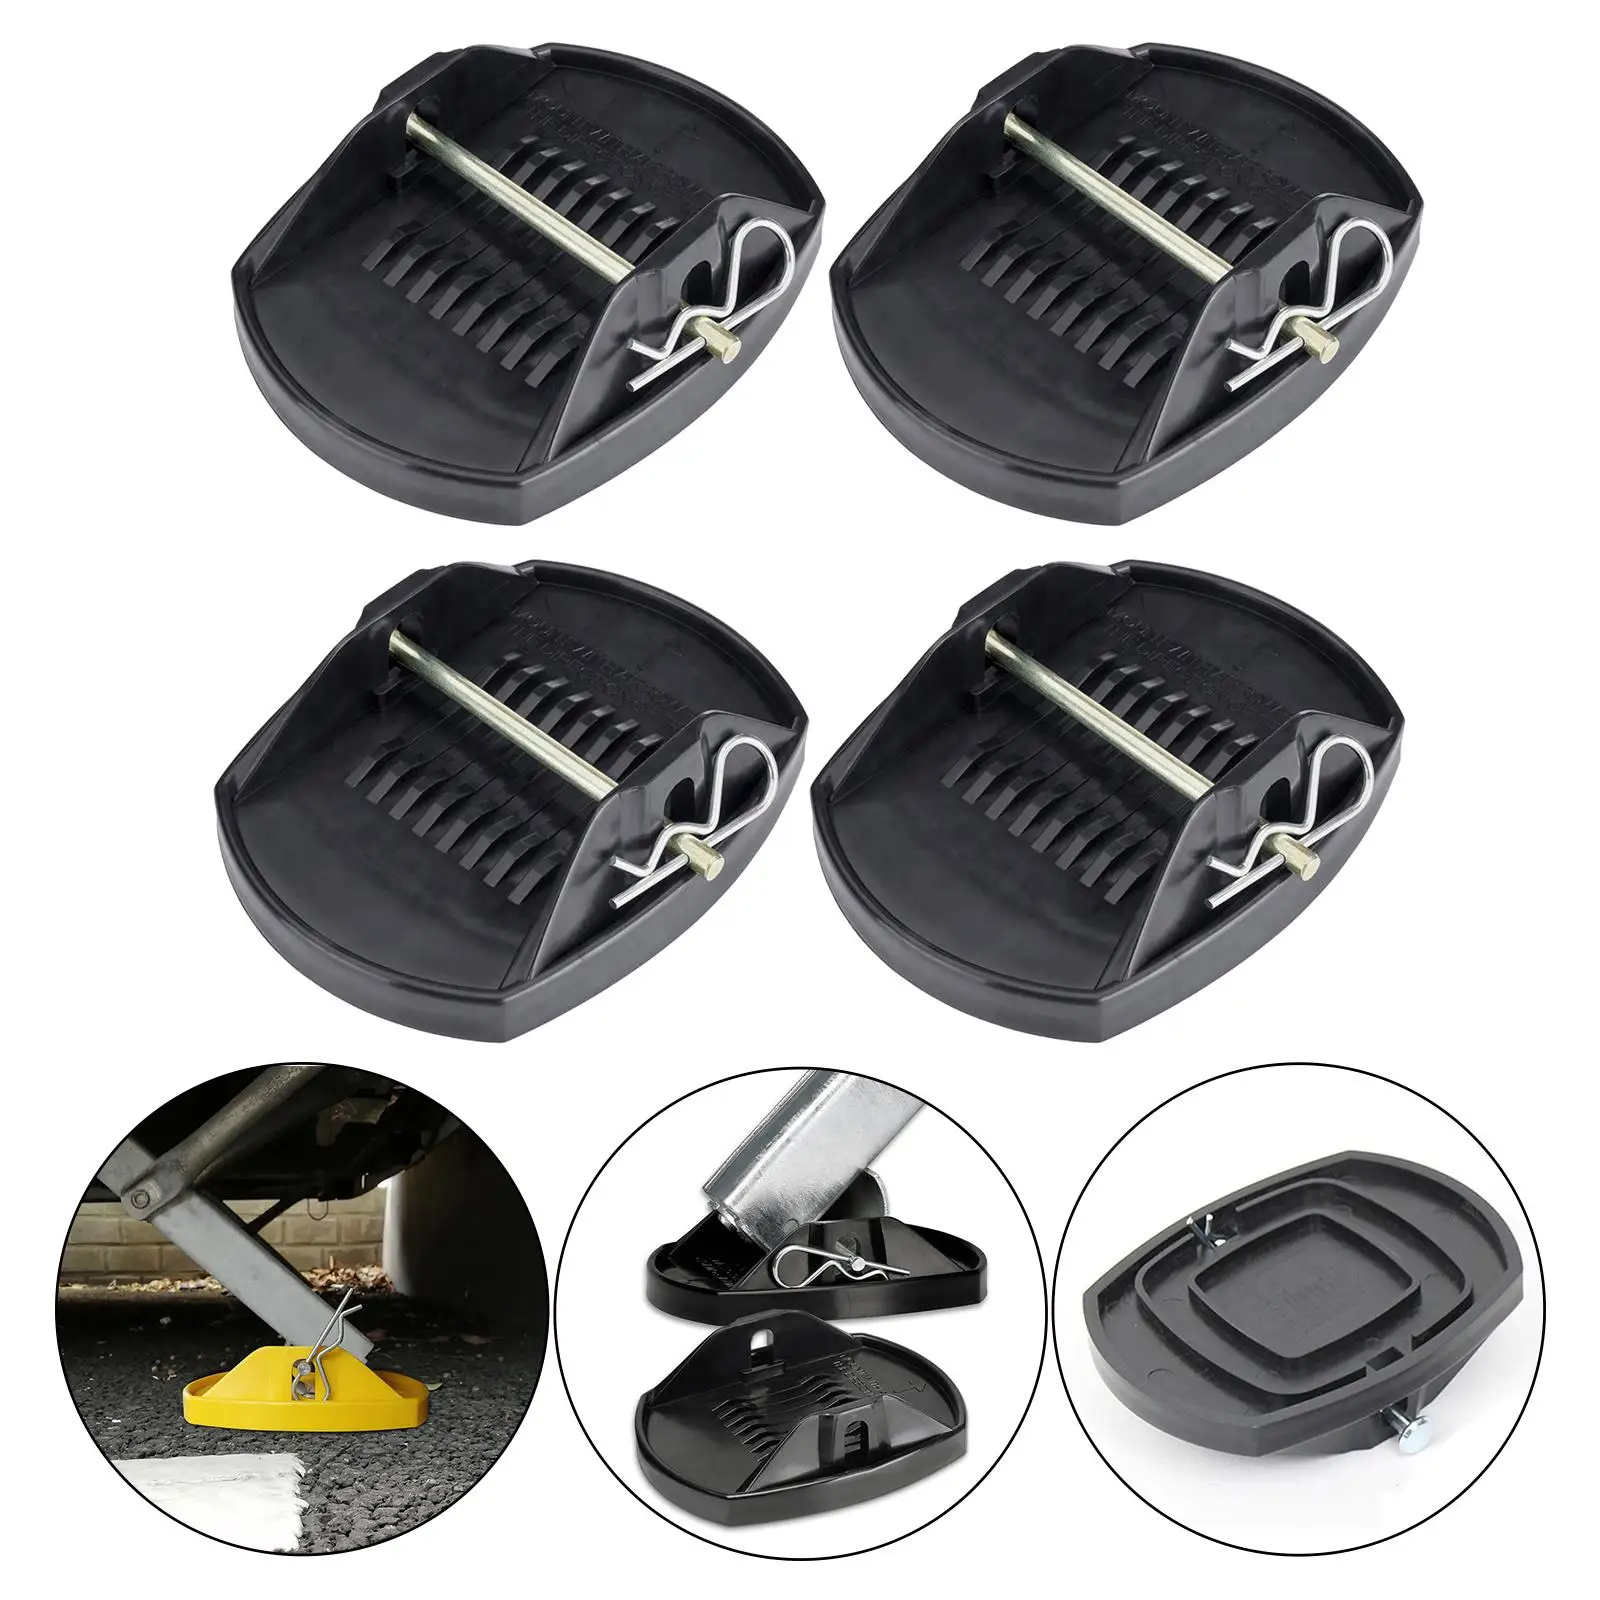 4 Pieces  Pads Wheel Foot Leg Support Adapter for Trailers